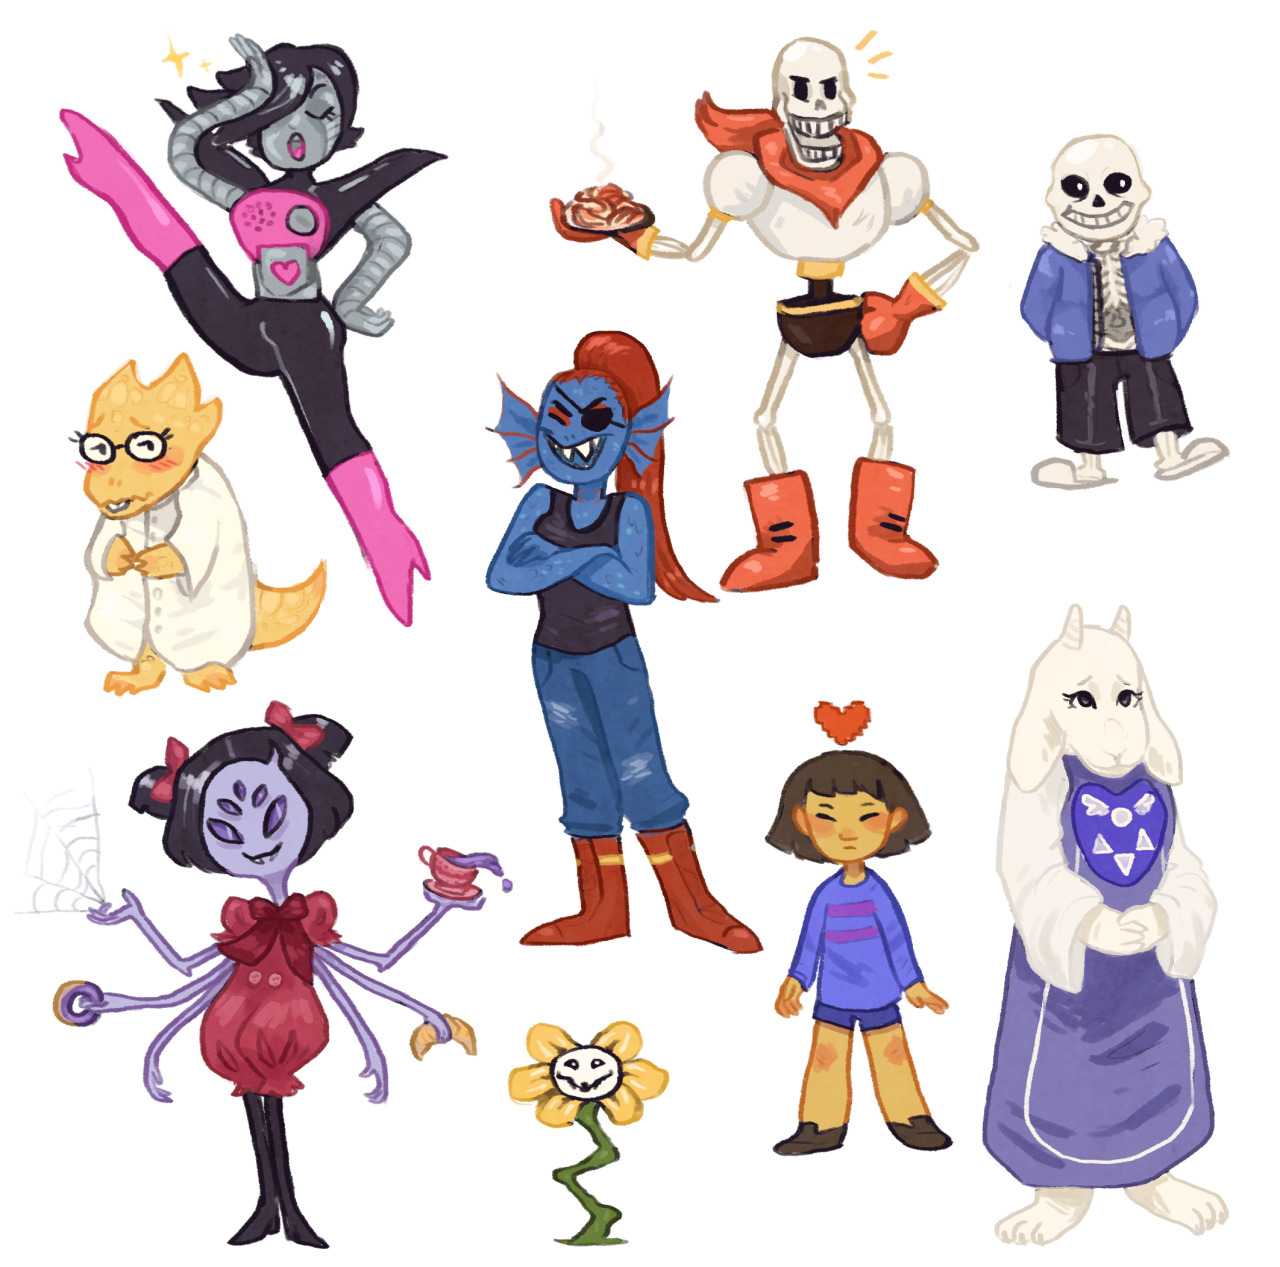 Which Undertale Character Are You?